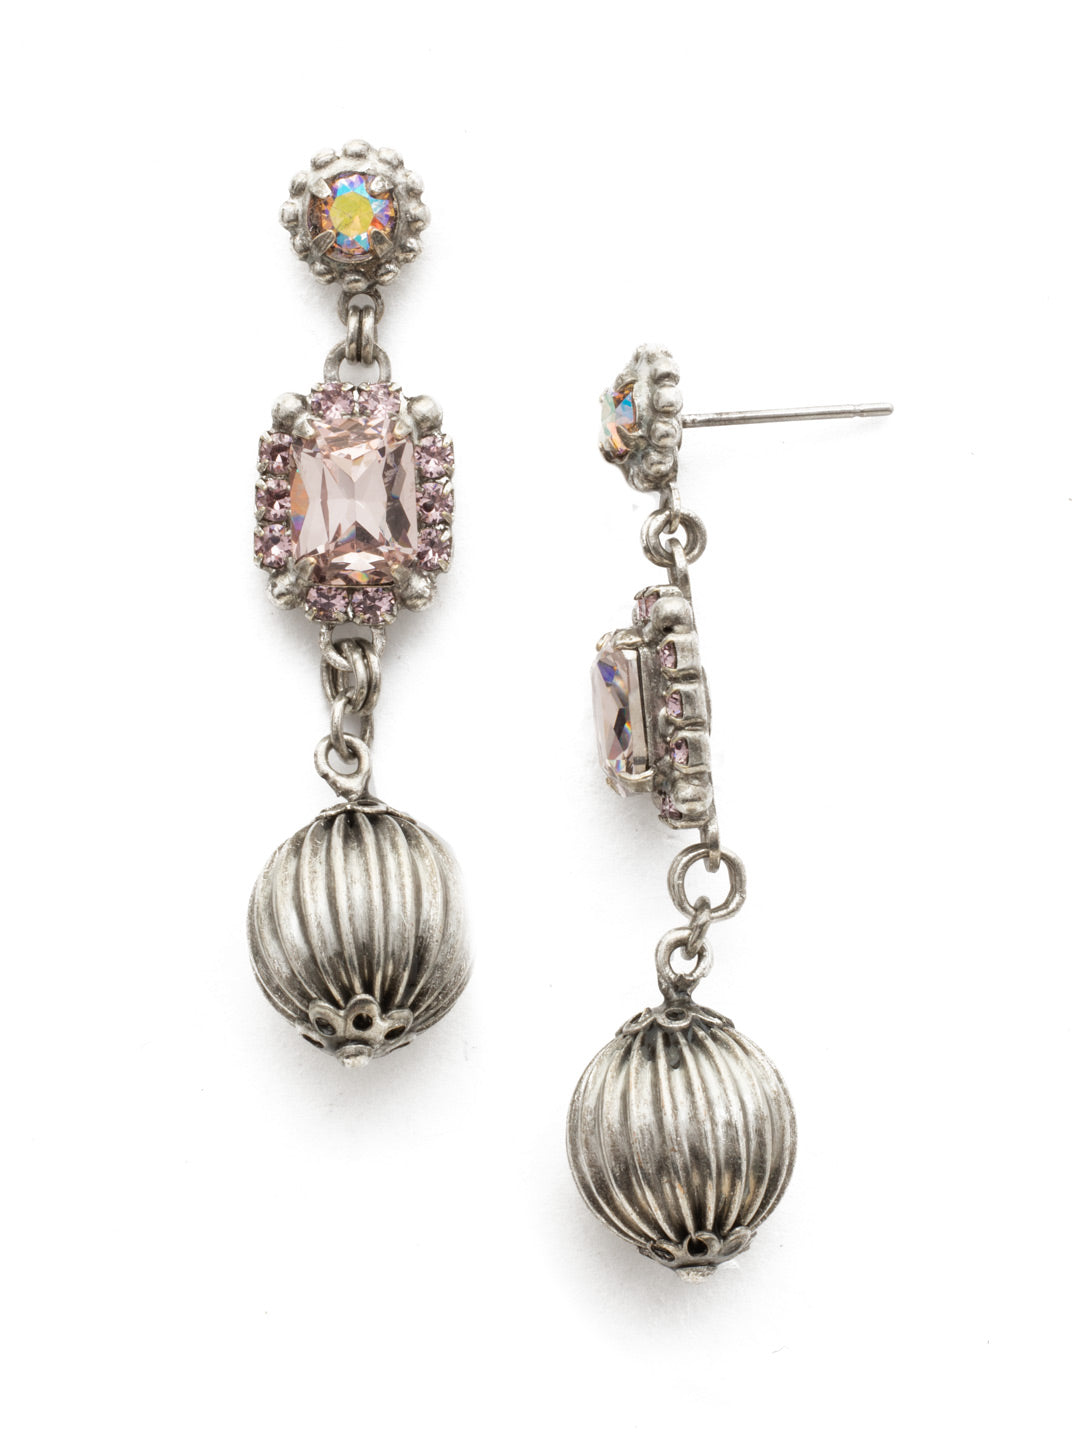 Thistle Earrings - EDU36ASLPA - Three tier earrings with a round crystal in the top tier, a second tier of a cushion crystal surrounded by round crystals, and a hanging metal sphere with a stud post